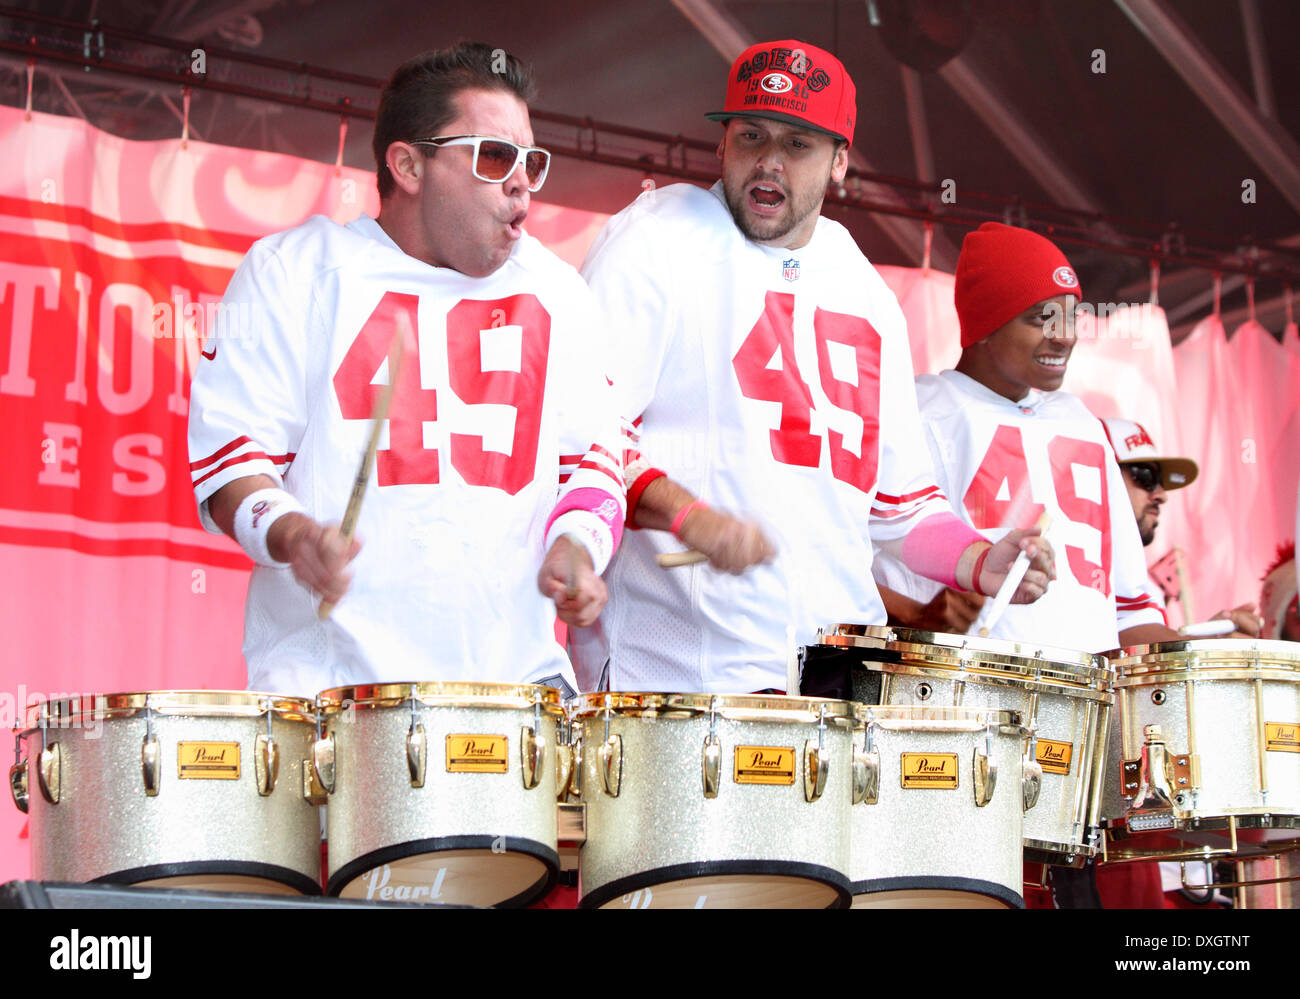 San Francisco 49ers Drumline The NFL Fan Rally in Trafalgar Square hosted by Sky Sports NFL presenters before the game on Sunday between St. Louis Rams and the New England Patriots at Wembley Stadium. London, England - 27.10.12 Featuring: San Francisco 49ers Drumline Where: London, UK, United Kingdom When: 27 Oct 2012 Stock Photo